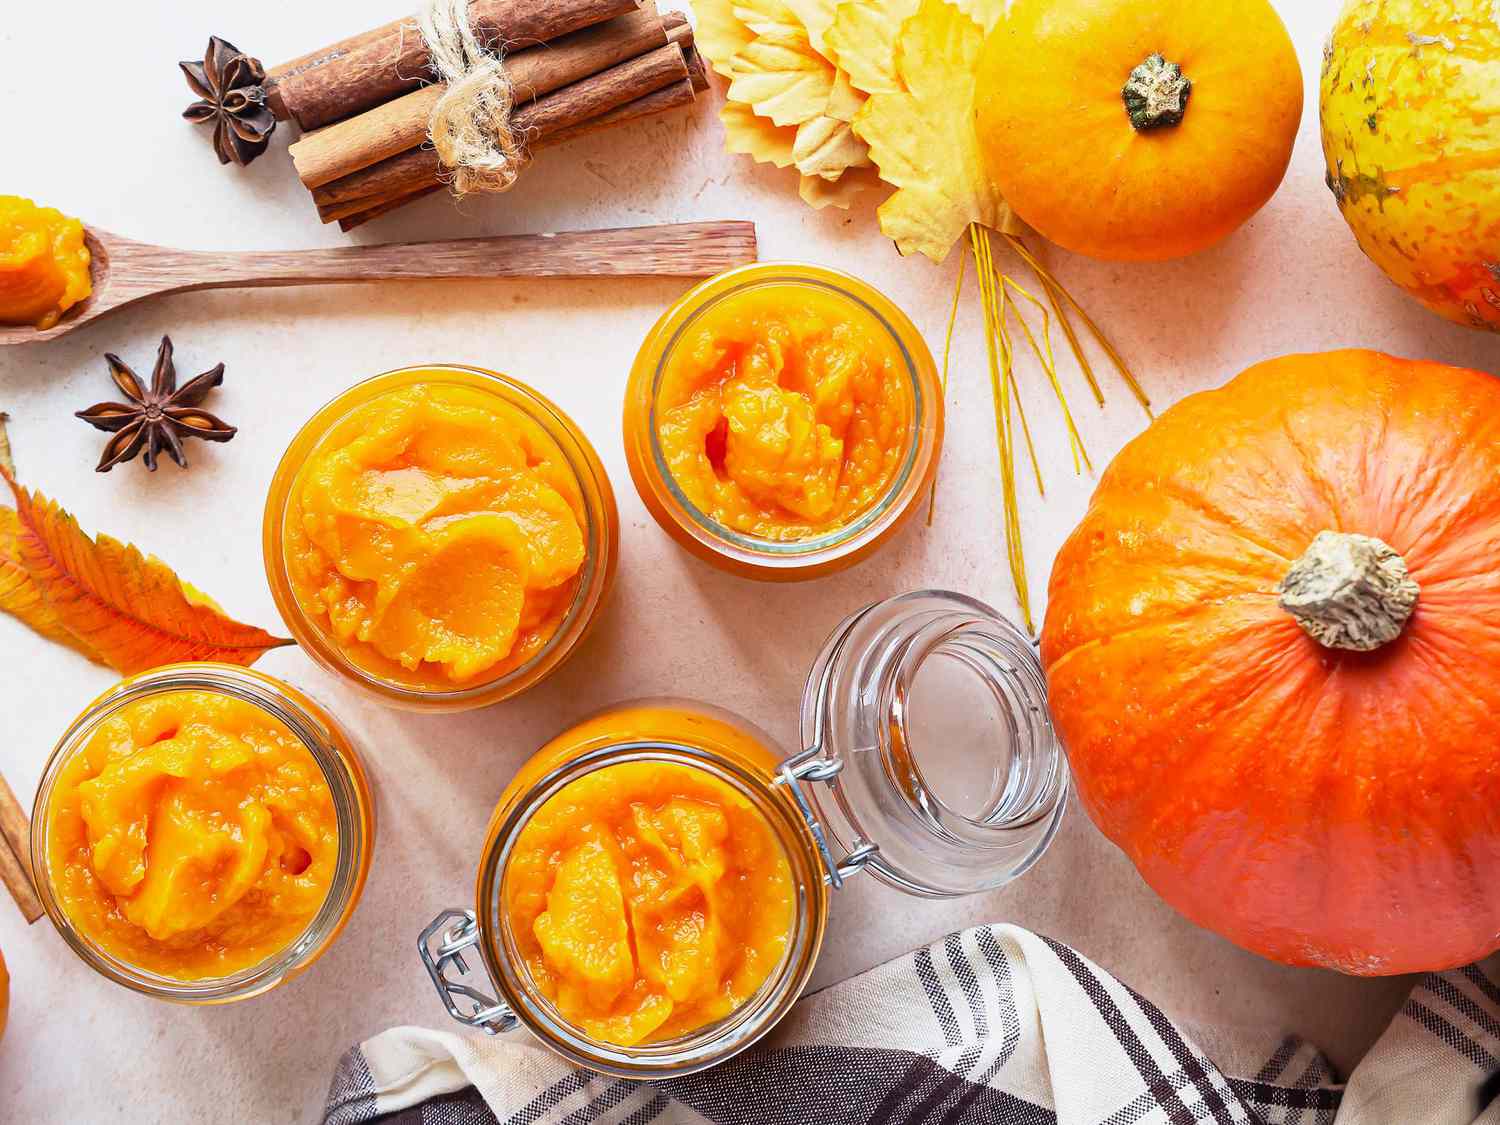 Pumpkin puree in different glass jars with spices and fresh pumpkins. Autumn or winter food. Light stone background. Top view.